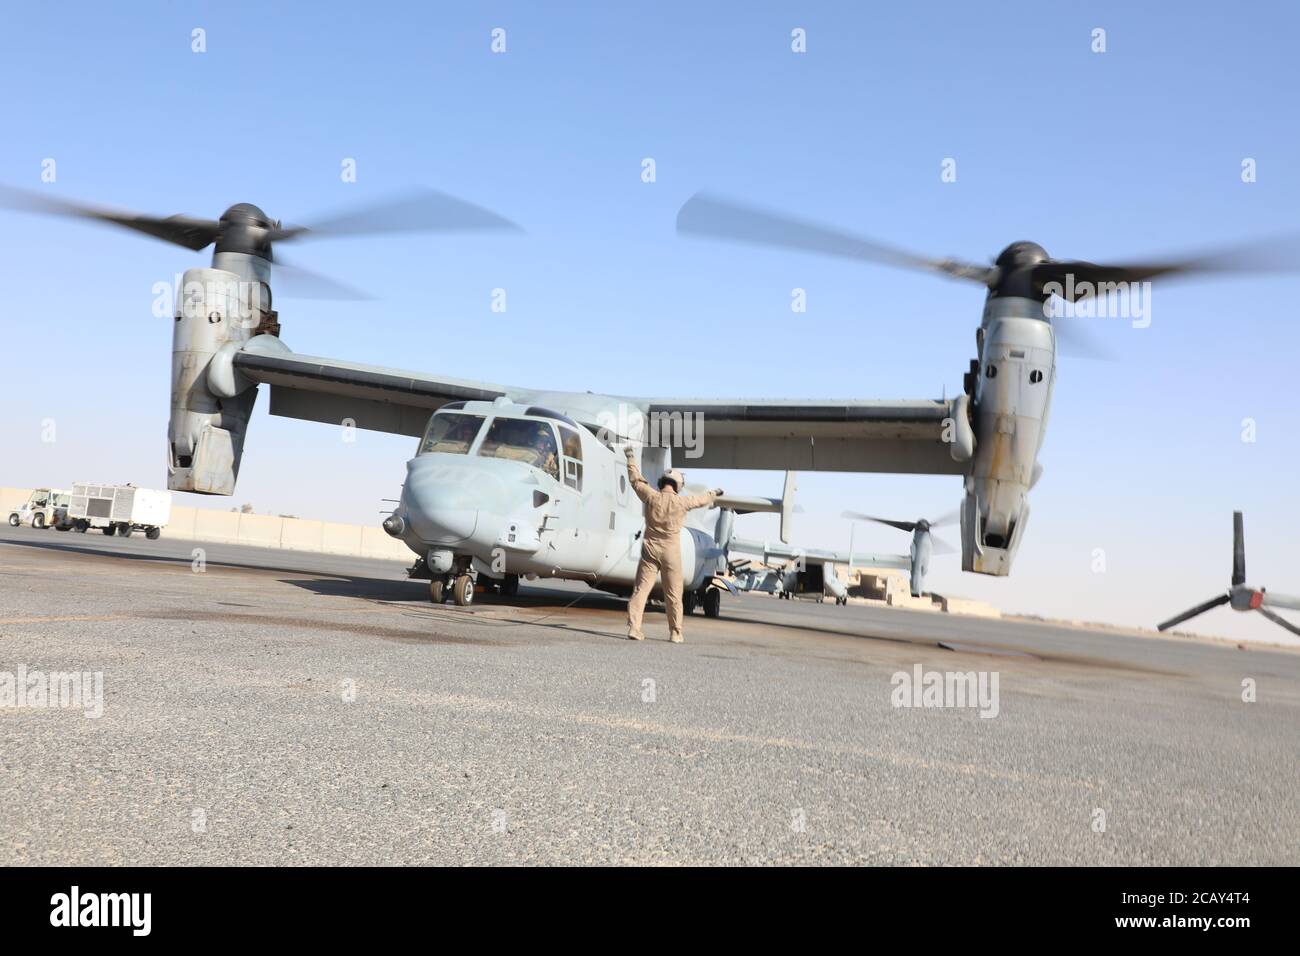 A U.S. Navy crew chief with Marine Medium Tiltrotor Squadron 166 (Reinforced,) assigned to the Special Purpose Marine Air-Ground Task Force - Crisis Response - Central Command 20.2, conducts preflight inspection for a MV-22B Osprey in Kuwait, Aug. 4, 2020. The SPMAGTF-CR-CC is a crisis response force, prepared to deploy a variety of capabilities across the region. (U.S. Marine Corps Photo by Cpl. Cutler Brice) Stock Photo